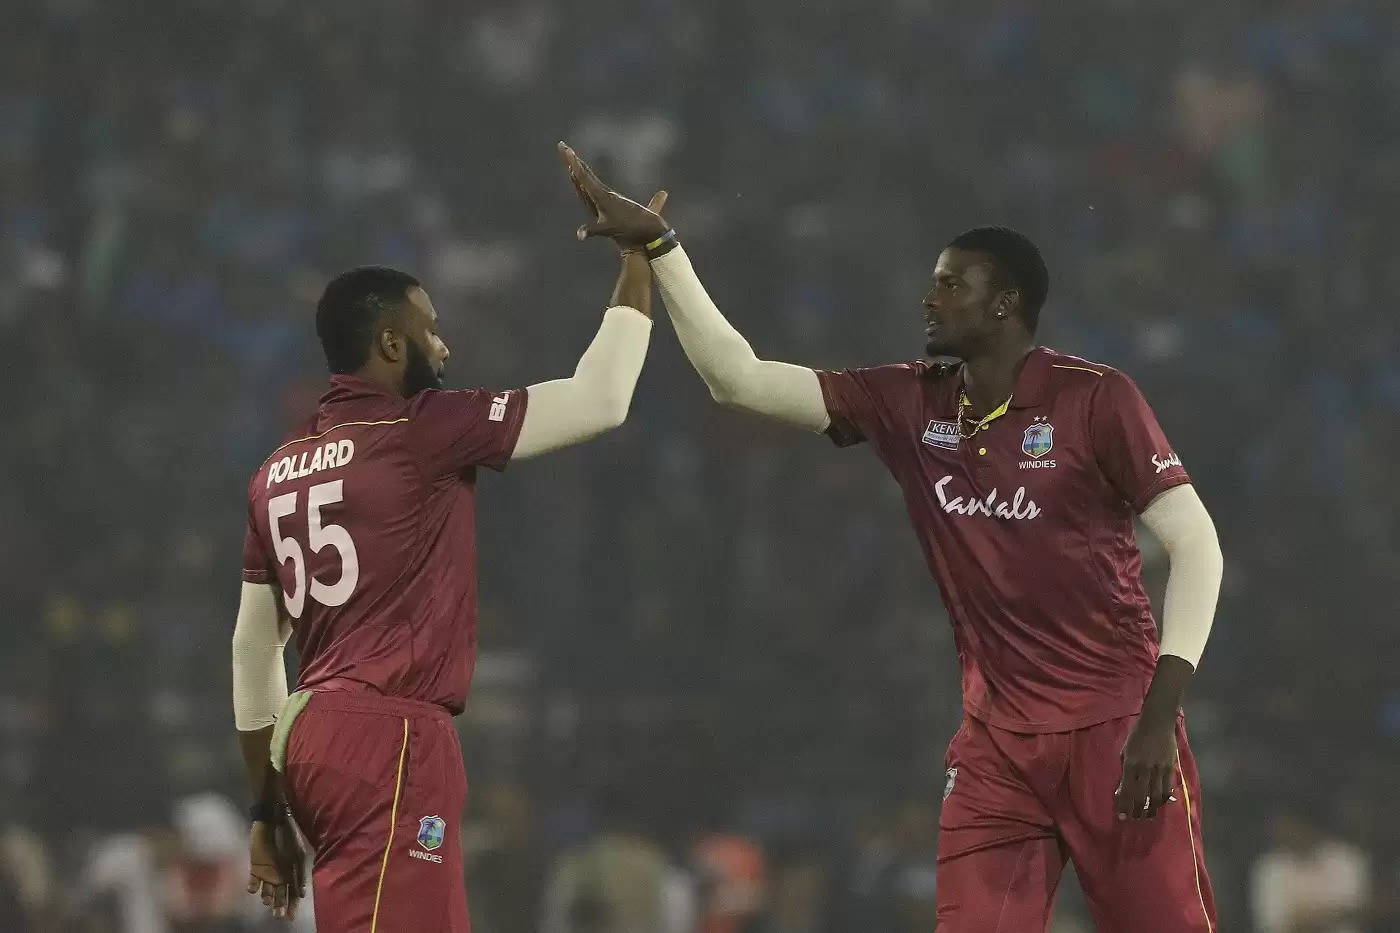 West Indies home summer 2021 schedule: Full Fixtures and Timings